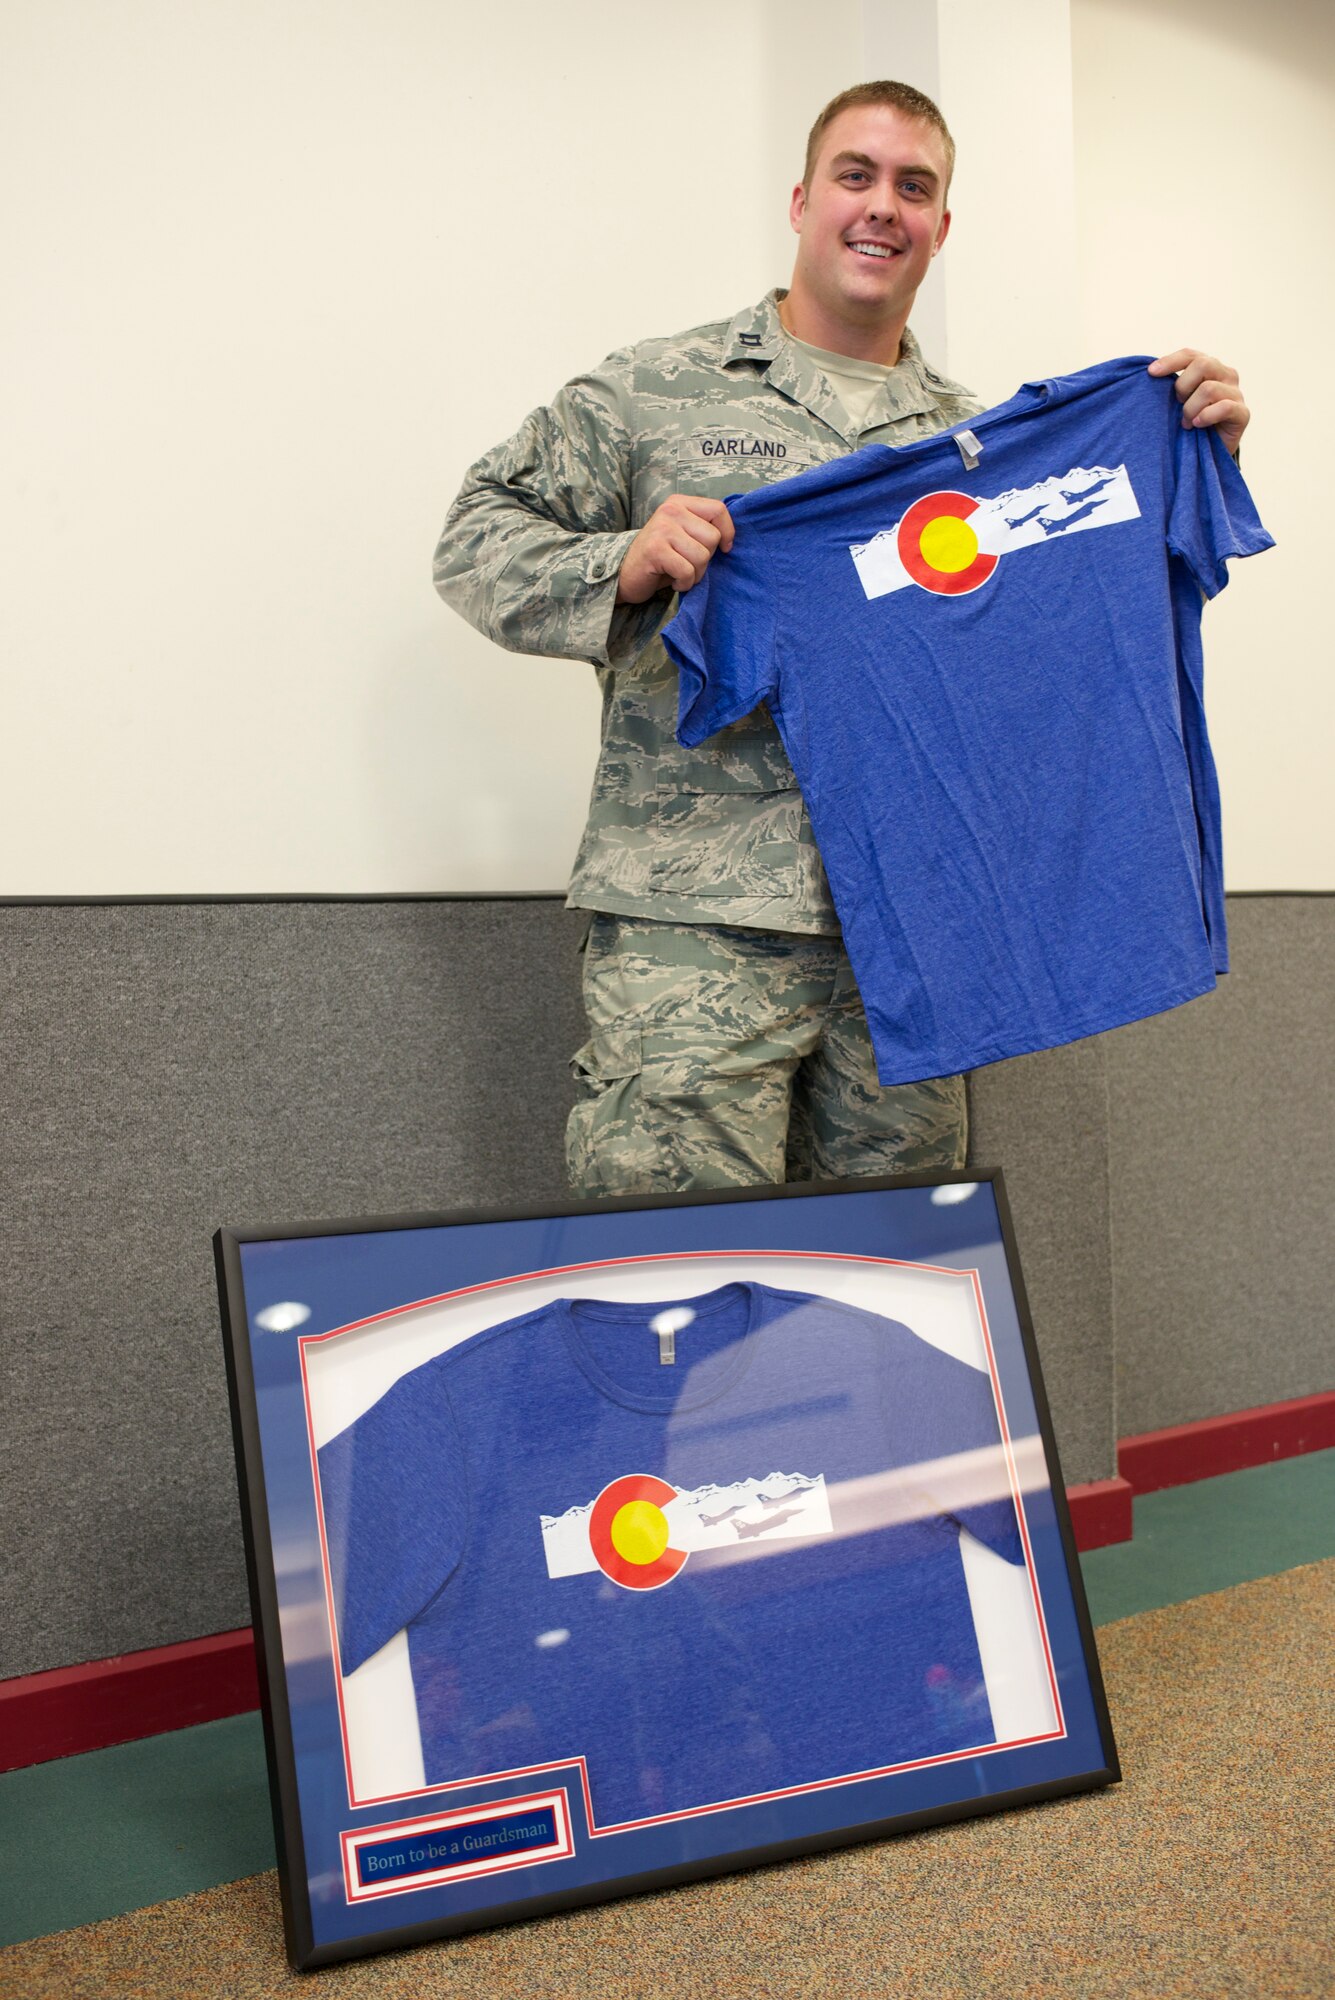 U.S. Air Force Capt. Benjamin N. Garland, Public Affairs Officer and offensive lineman for the Atlanta Falcons, assigned to 140th Wing, receives a token of thanks from the Army National Guard at Buckley Air Force Base Feb. 21, 2016. Garland designed a curriculum and trained service members, alongside Army National Guardsmen, about the importance of reporting concussions, military protocol and early treatment. (U.S. Air National Guard photo by Senior Airman Bobbie Reynolds)